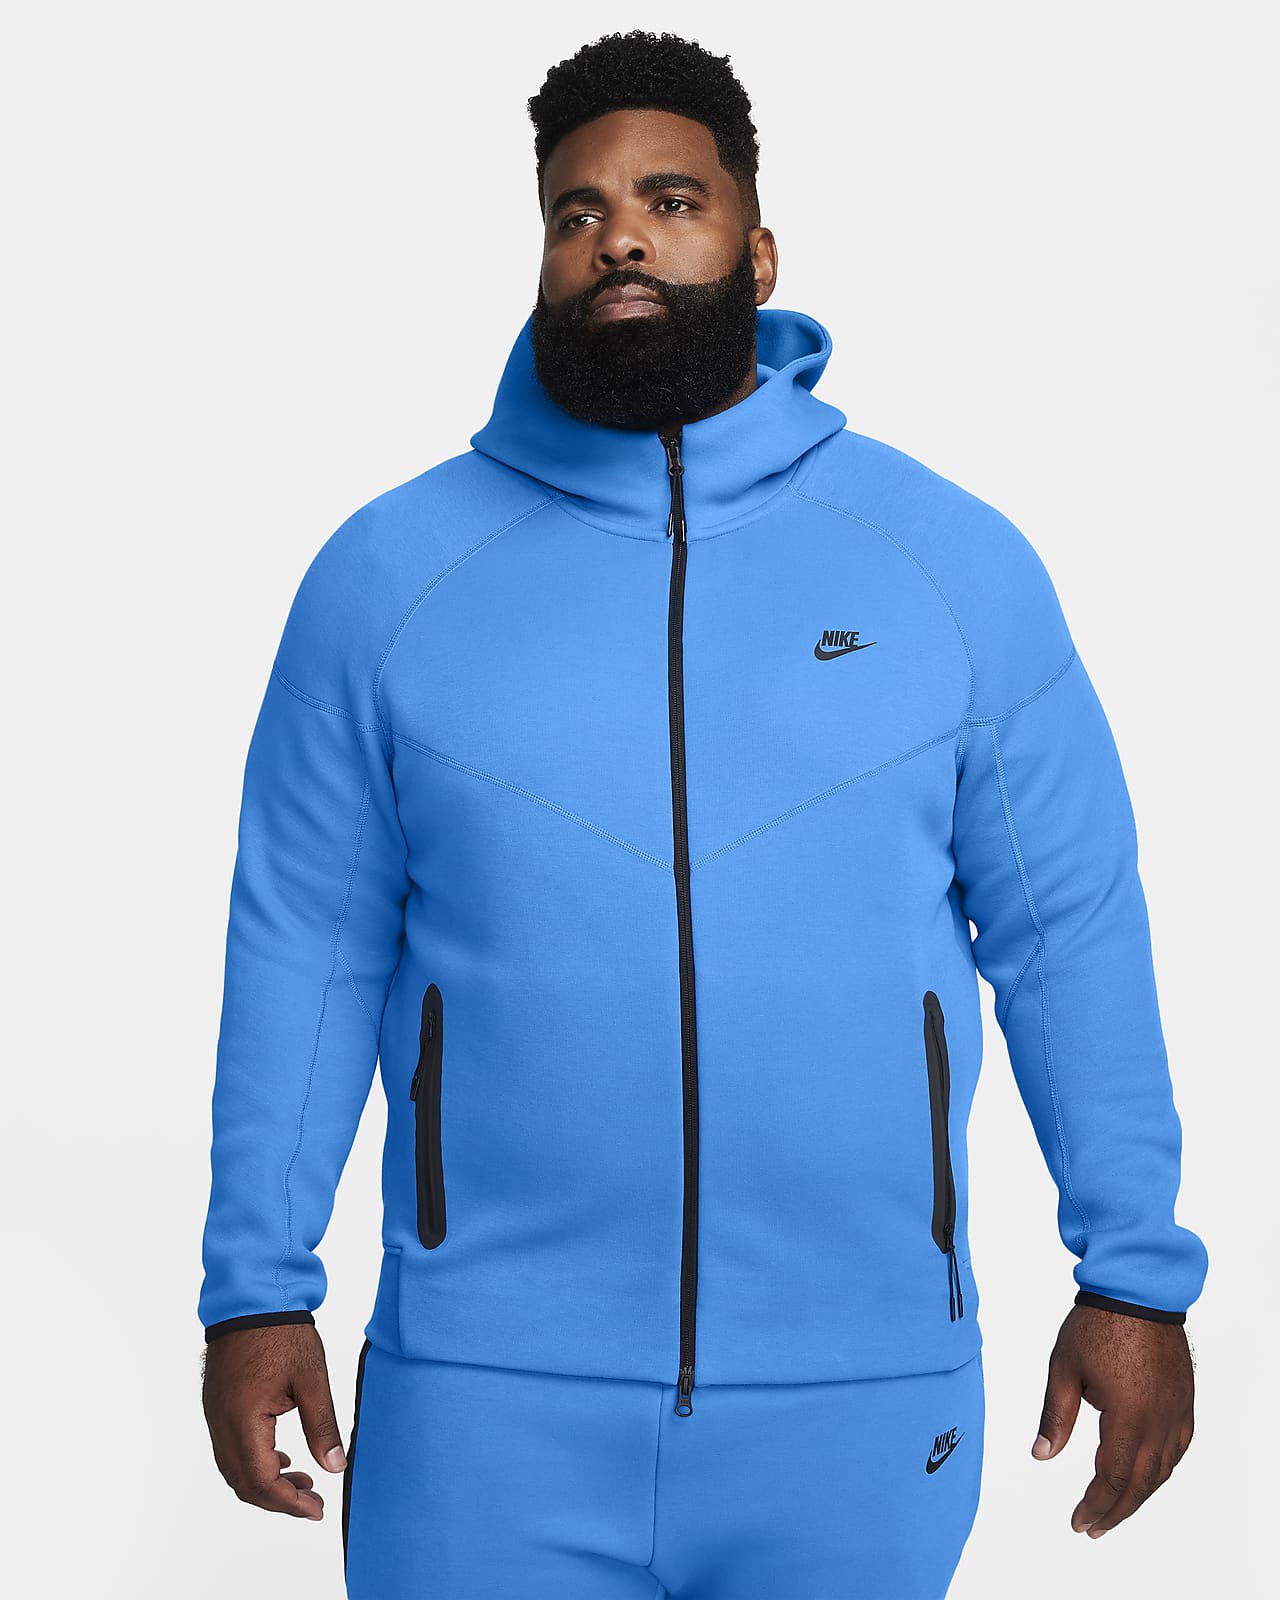 Nike Tech Fleece - Quality clothing with free shipping